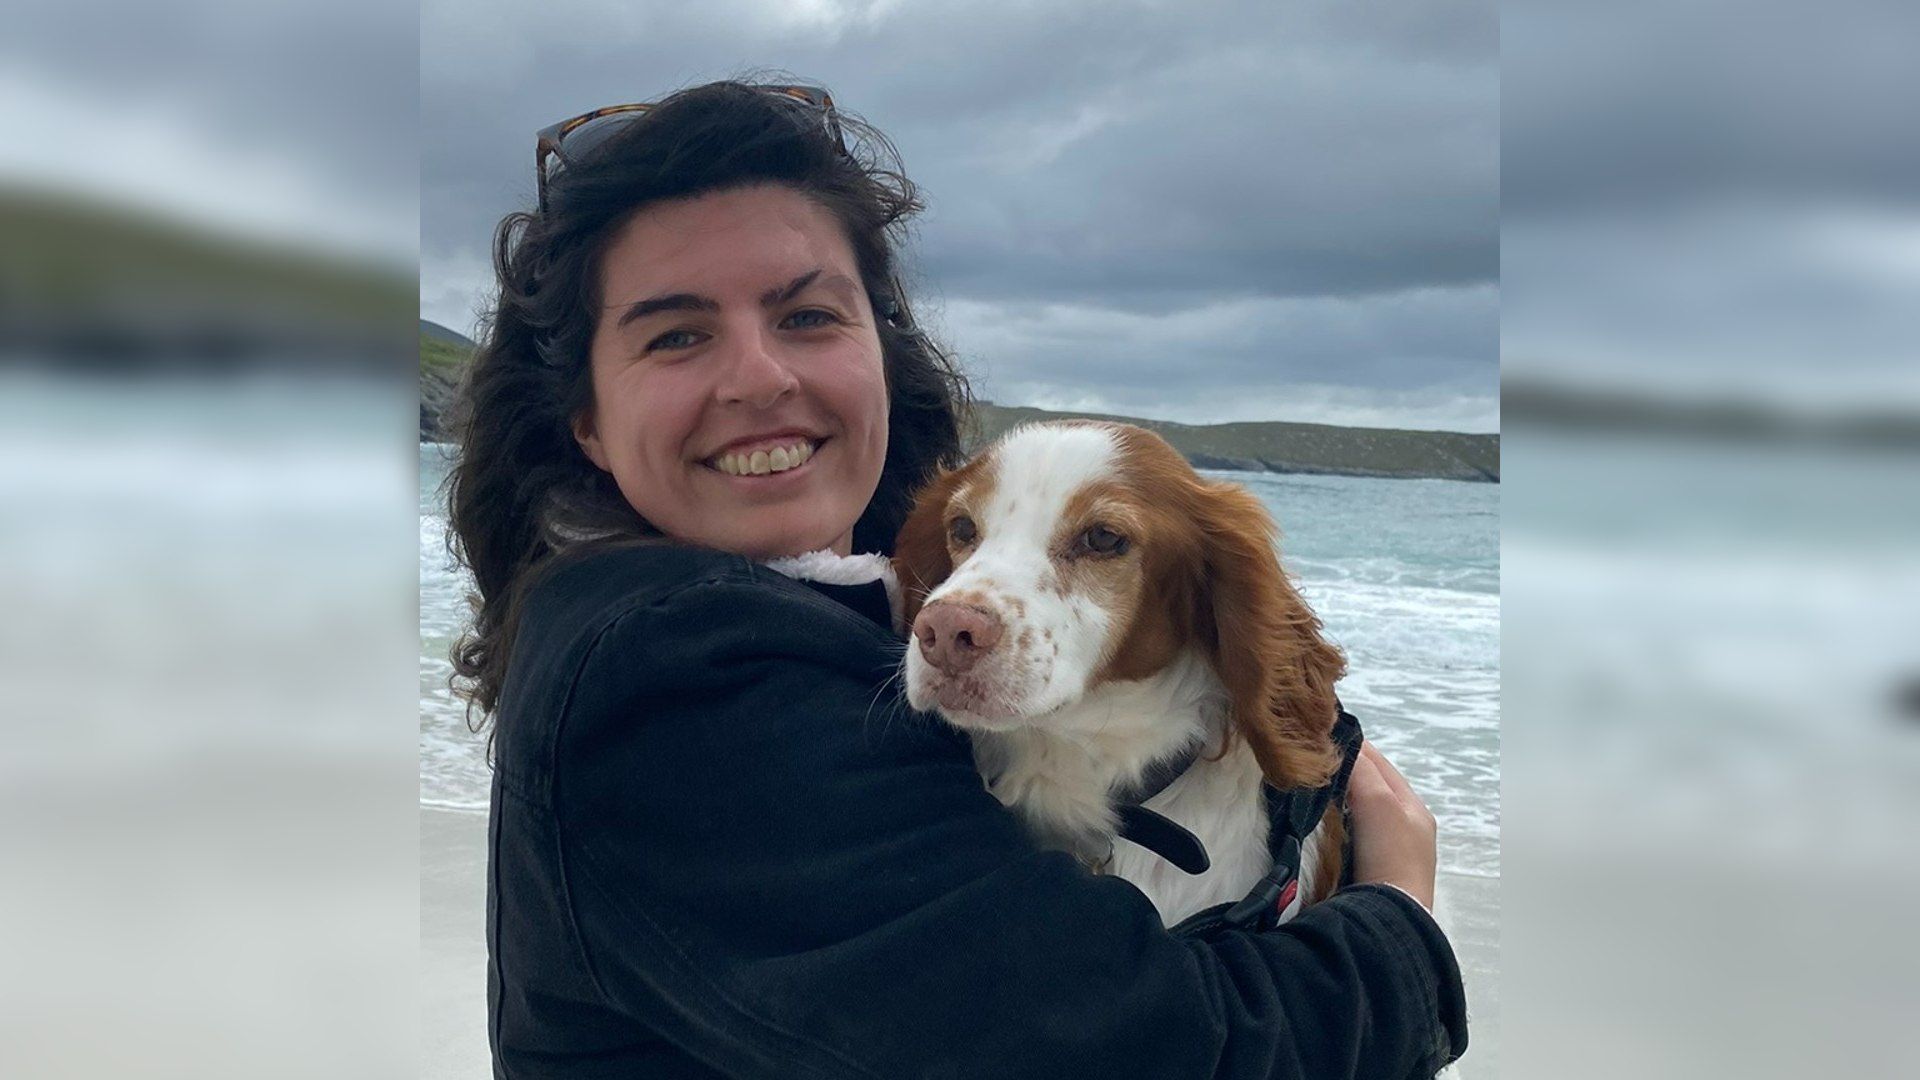 A woman with a visible difference holding a dog on a beach